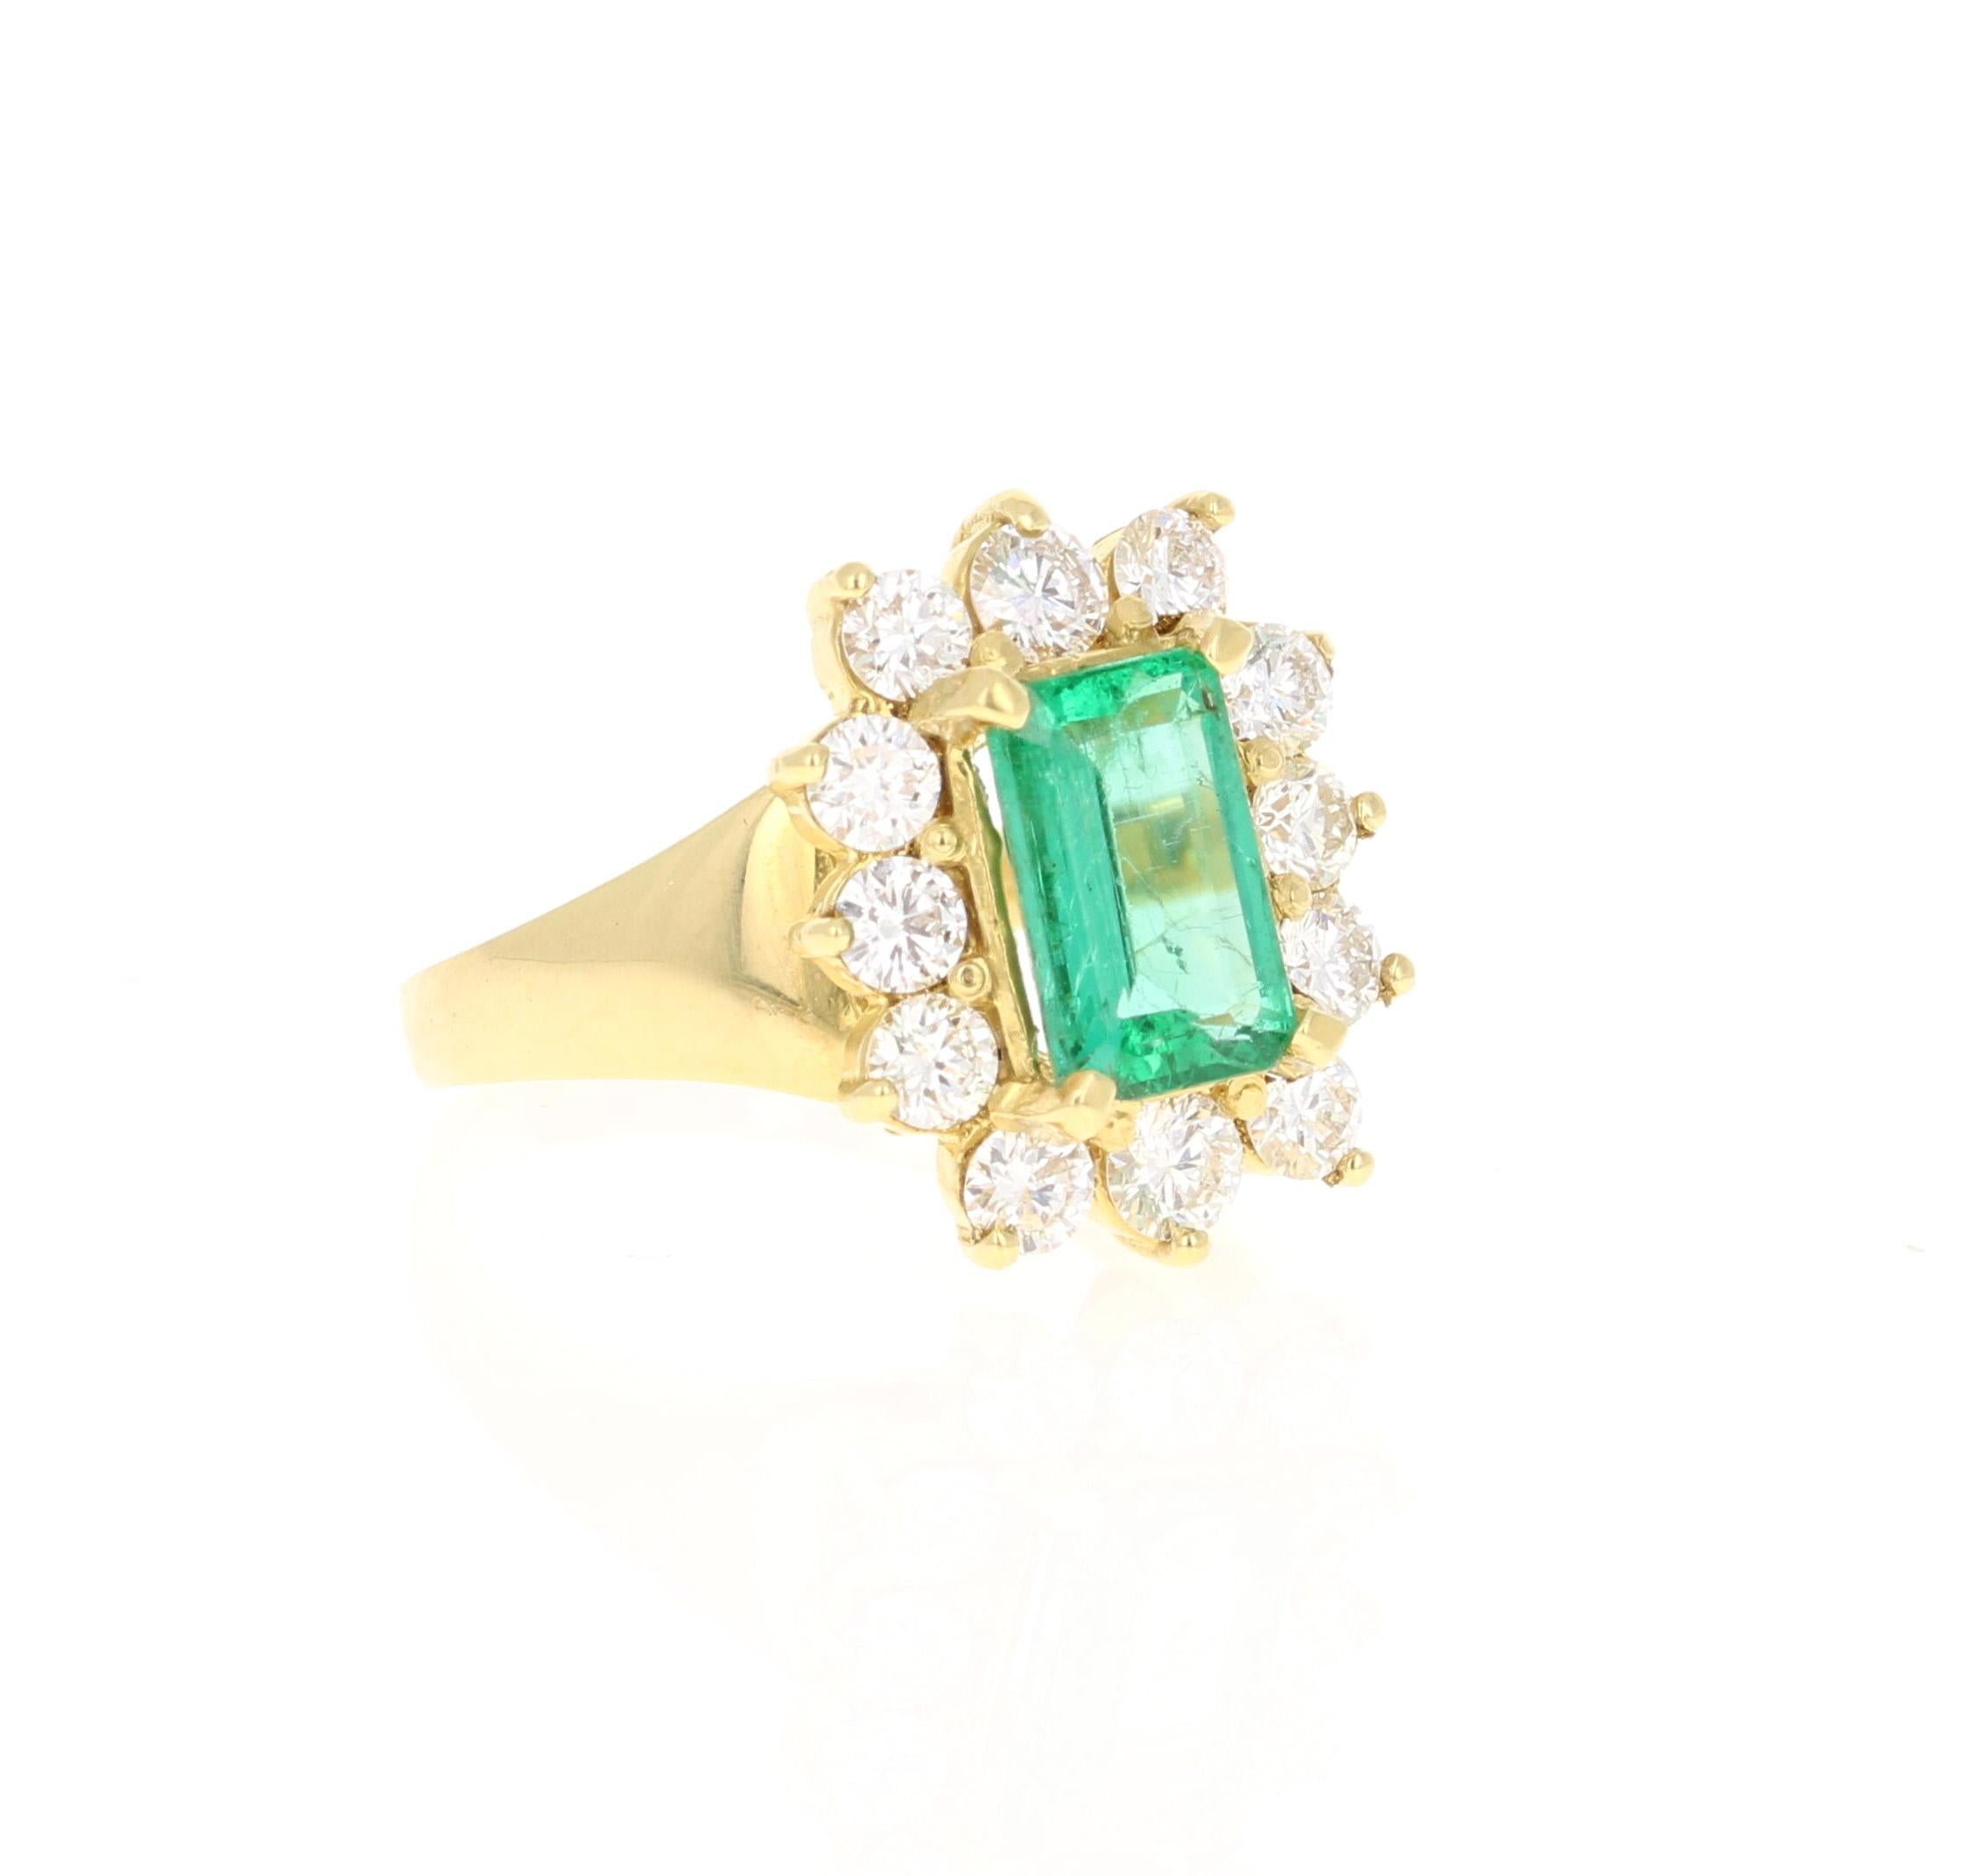 This ring has a 1.60 Carat Emerald Cut Emerald that is set in the center of the ring. The Emerald is surrounded by 12 Round Cut Diamonds that weigh 1.10 carats. (Clarity: SI, Color: F) The total carat weight of the ring is 2.70 carats.
The ring is